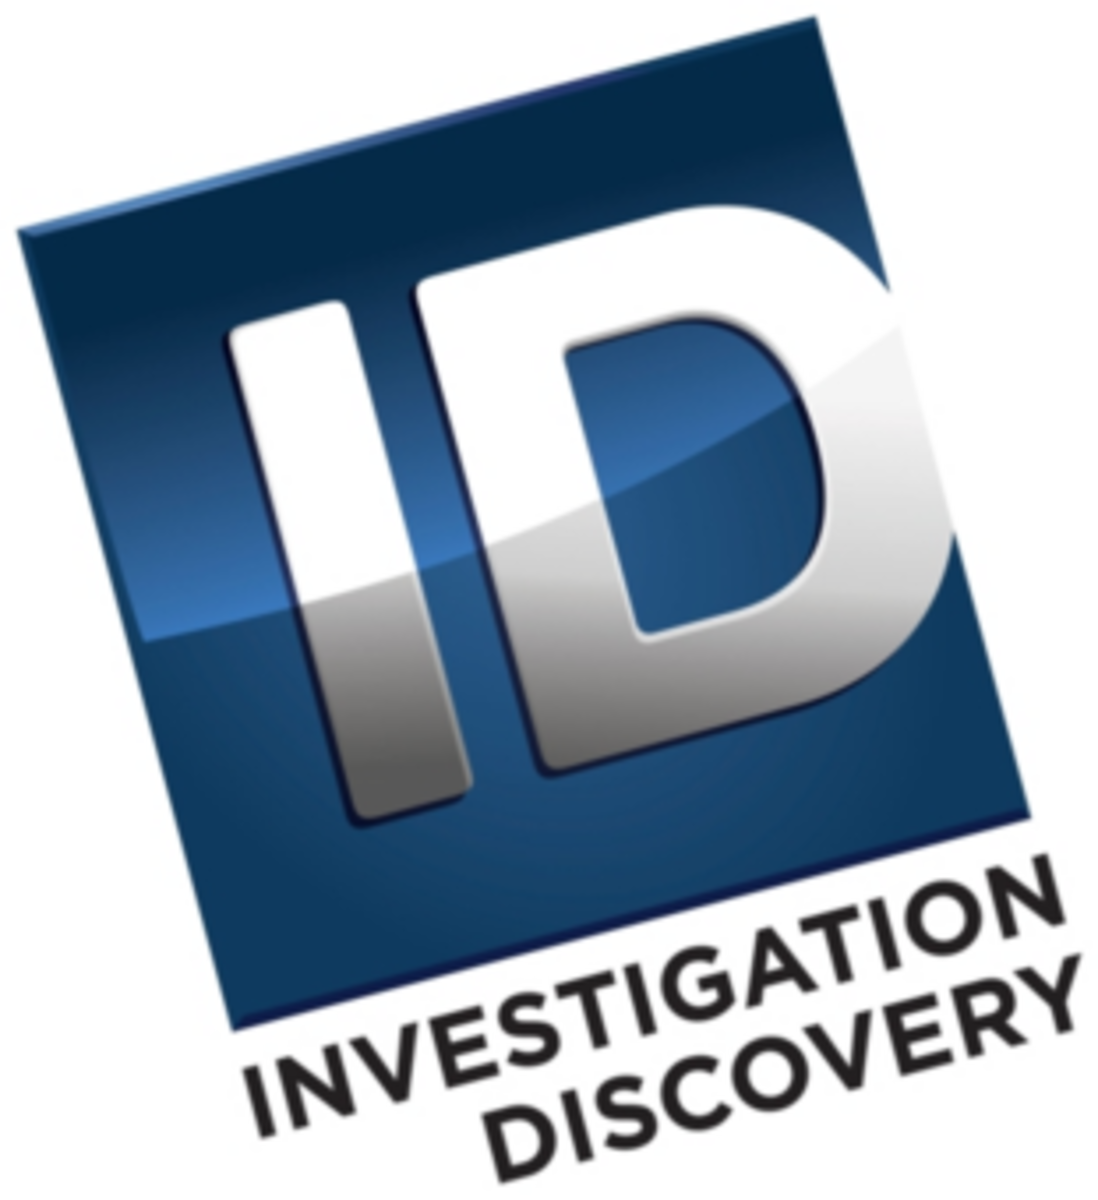 Investigationdiscovery - Investigation Discovery Logo Png (1098x1200), Png Download